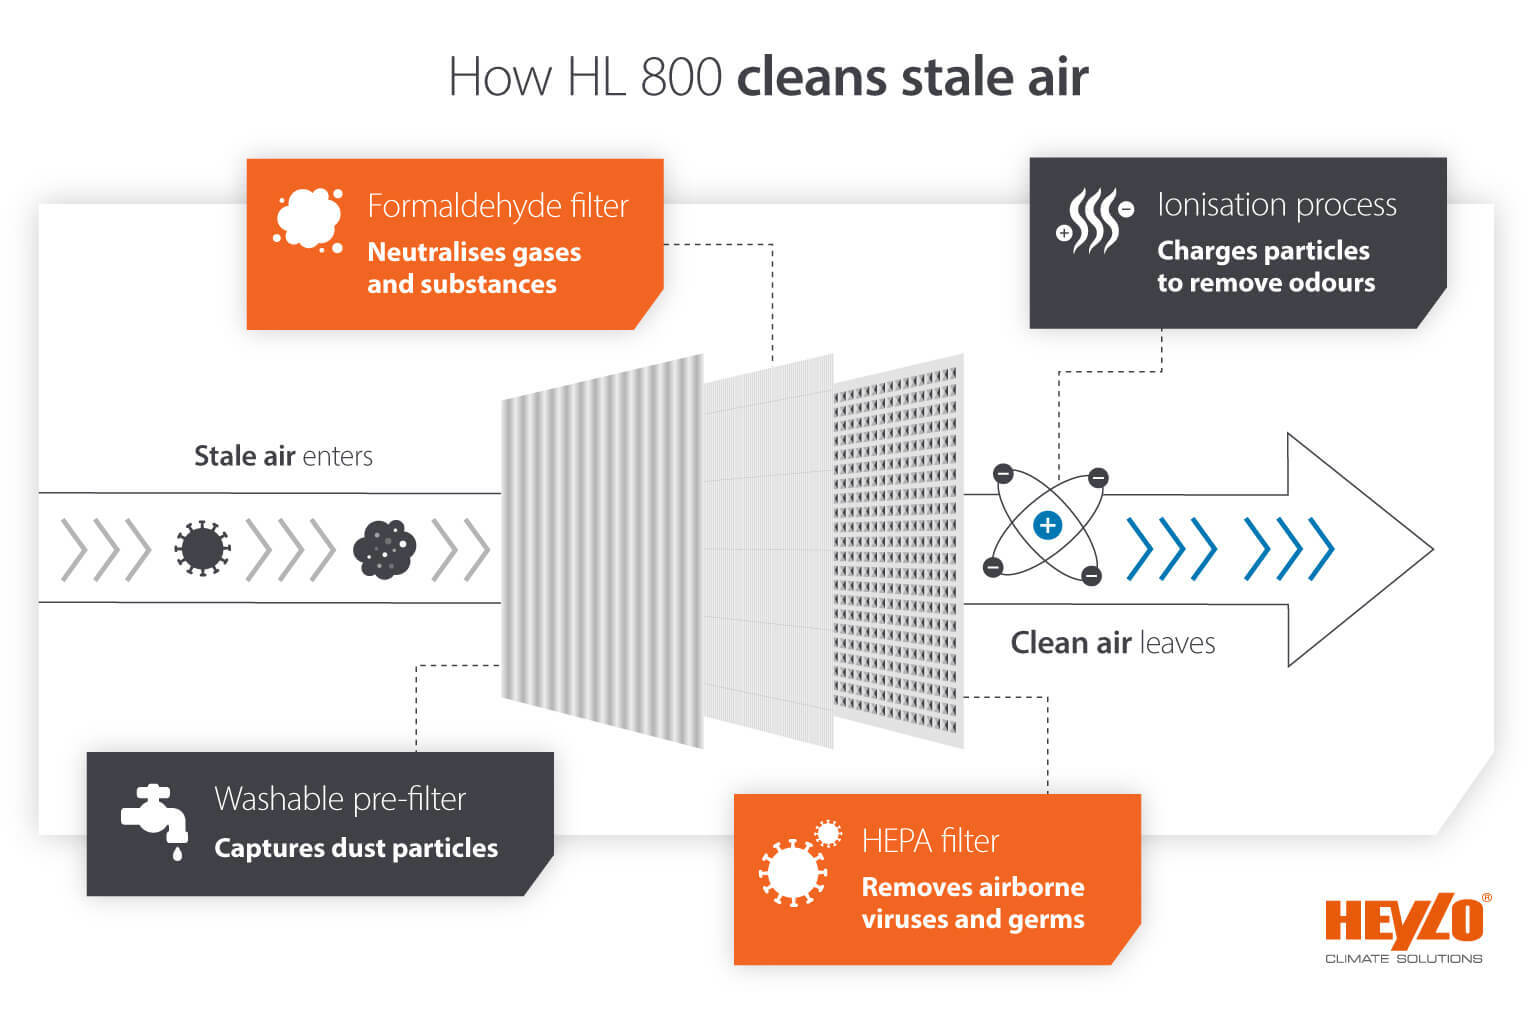 Image of the Heylo HL 800 air cleaning process removing dust and airborne viruses and germs